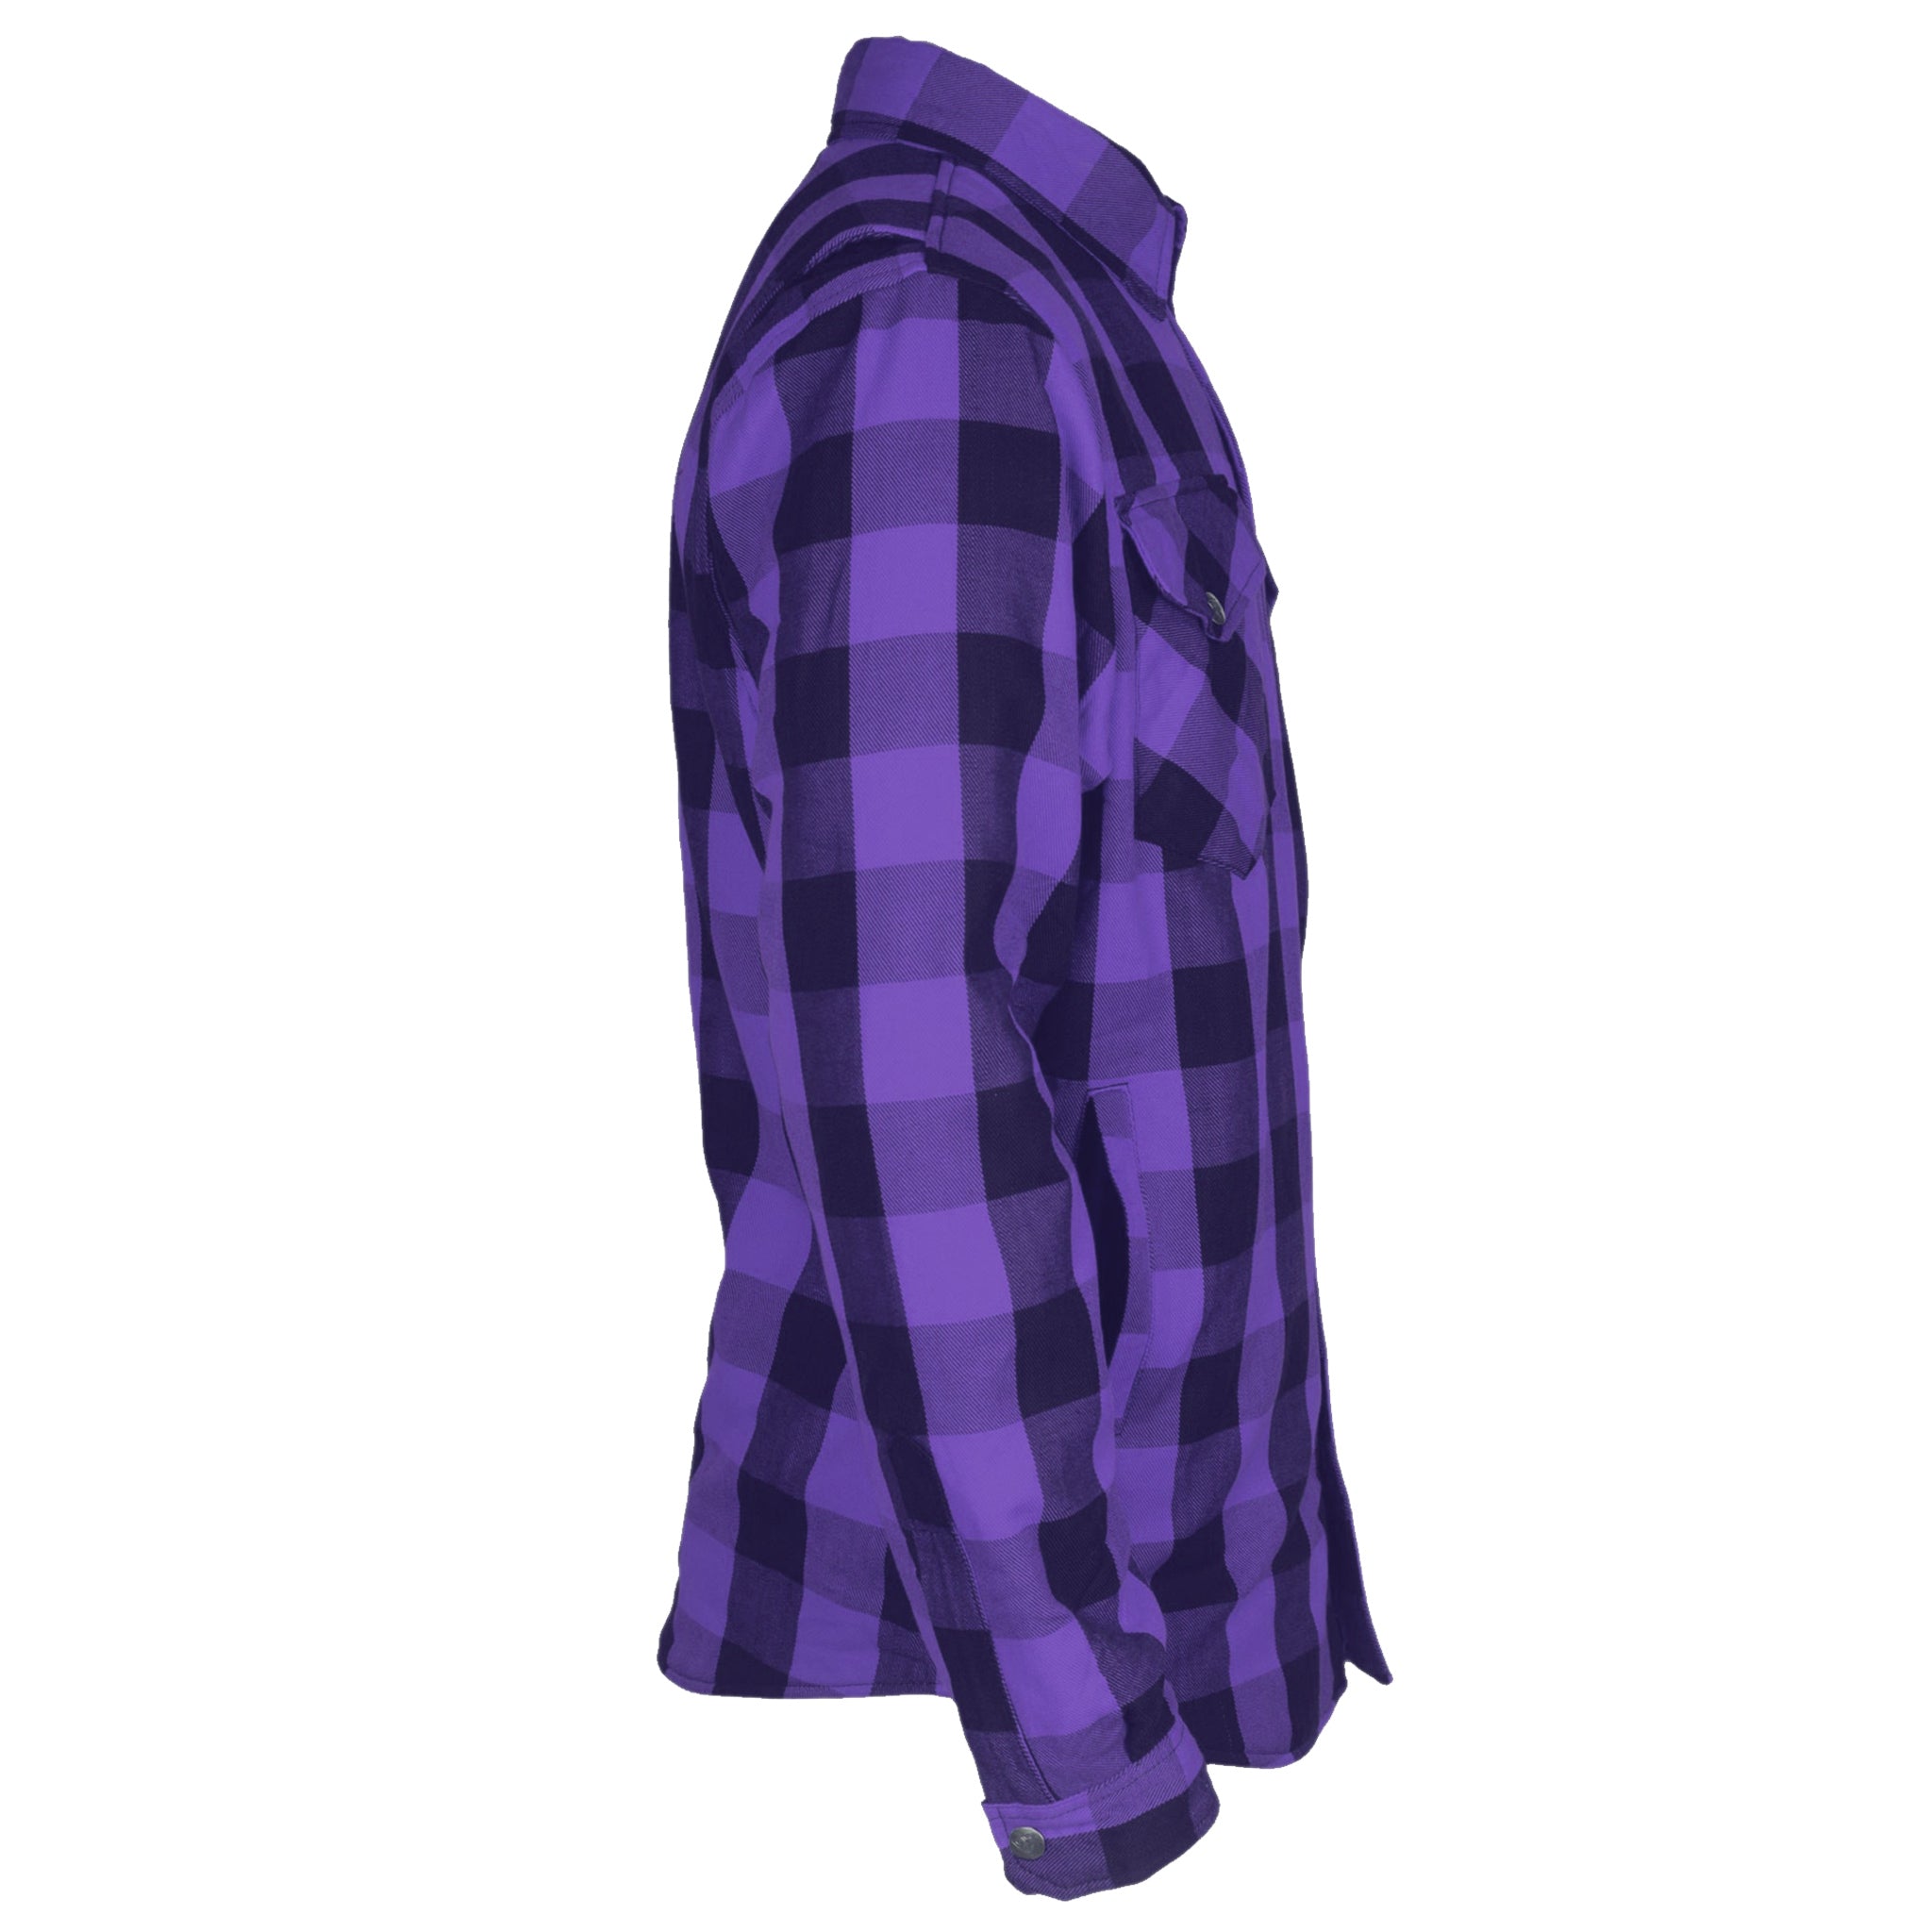 Protective Flannel Shirt "Purple Rain" - Purple and Black Checkered with Pads